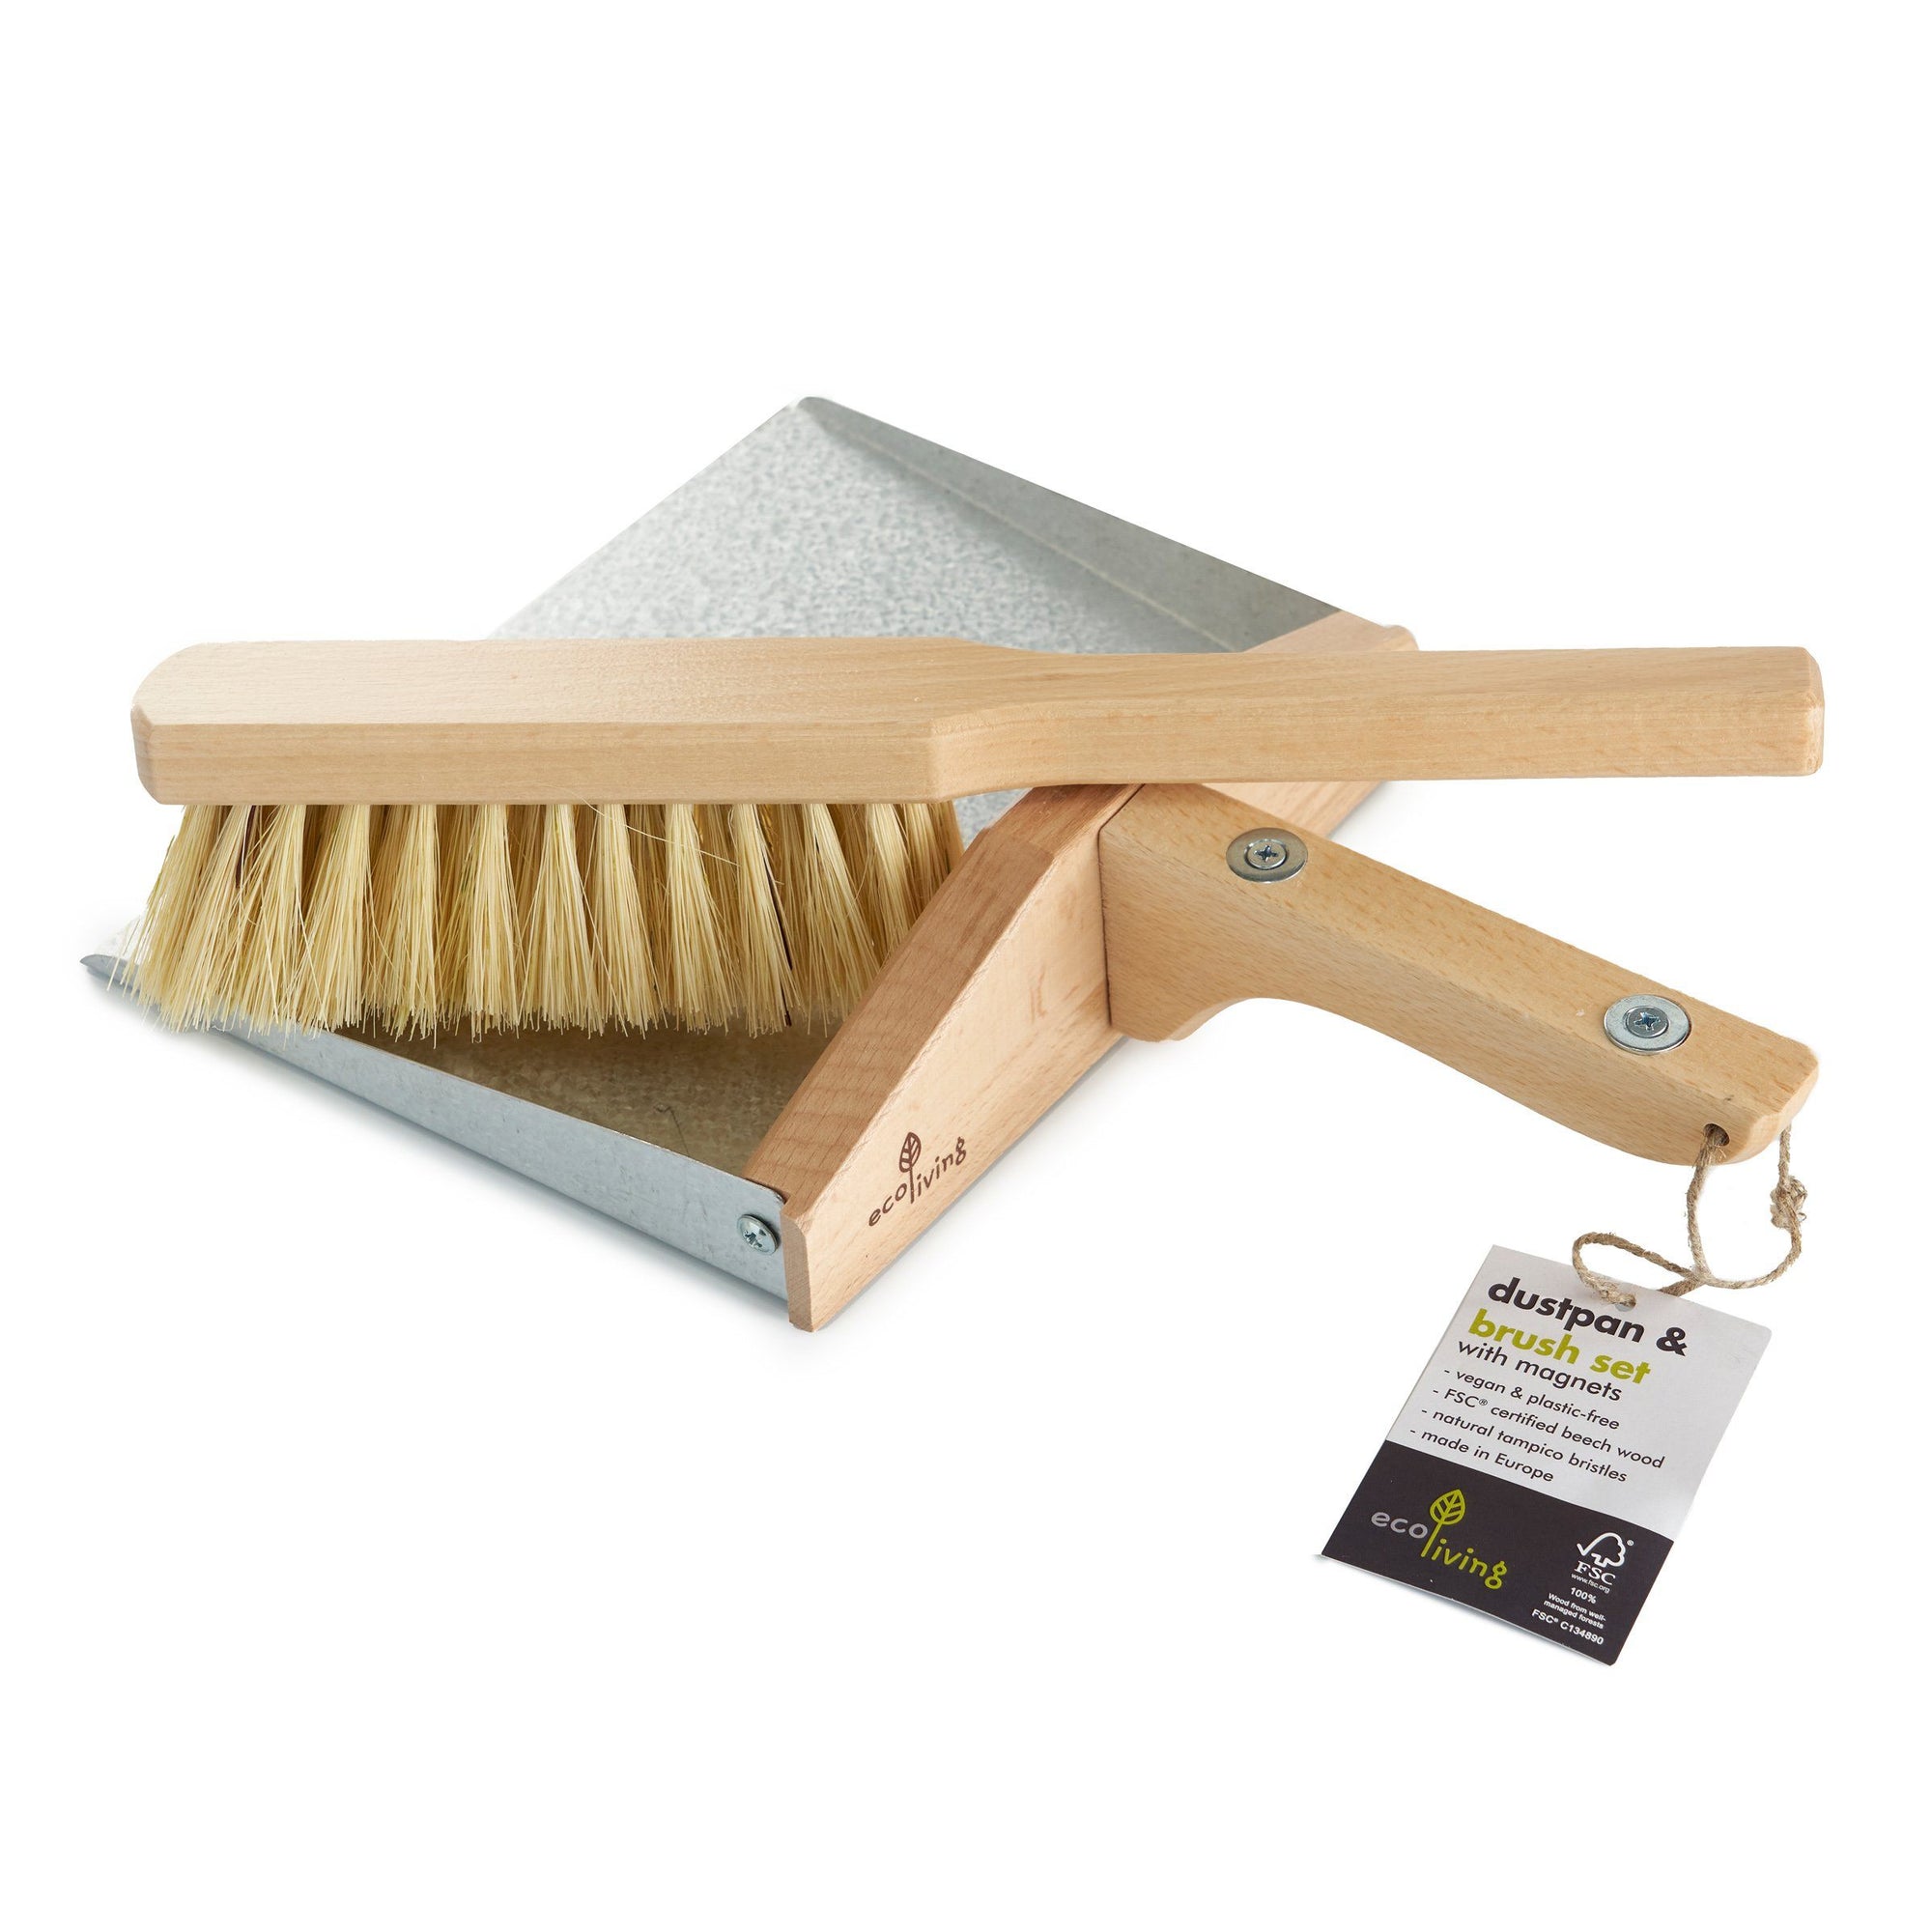 Metal Dust Pan and Wooden Brush Elephant Box 